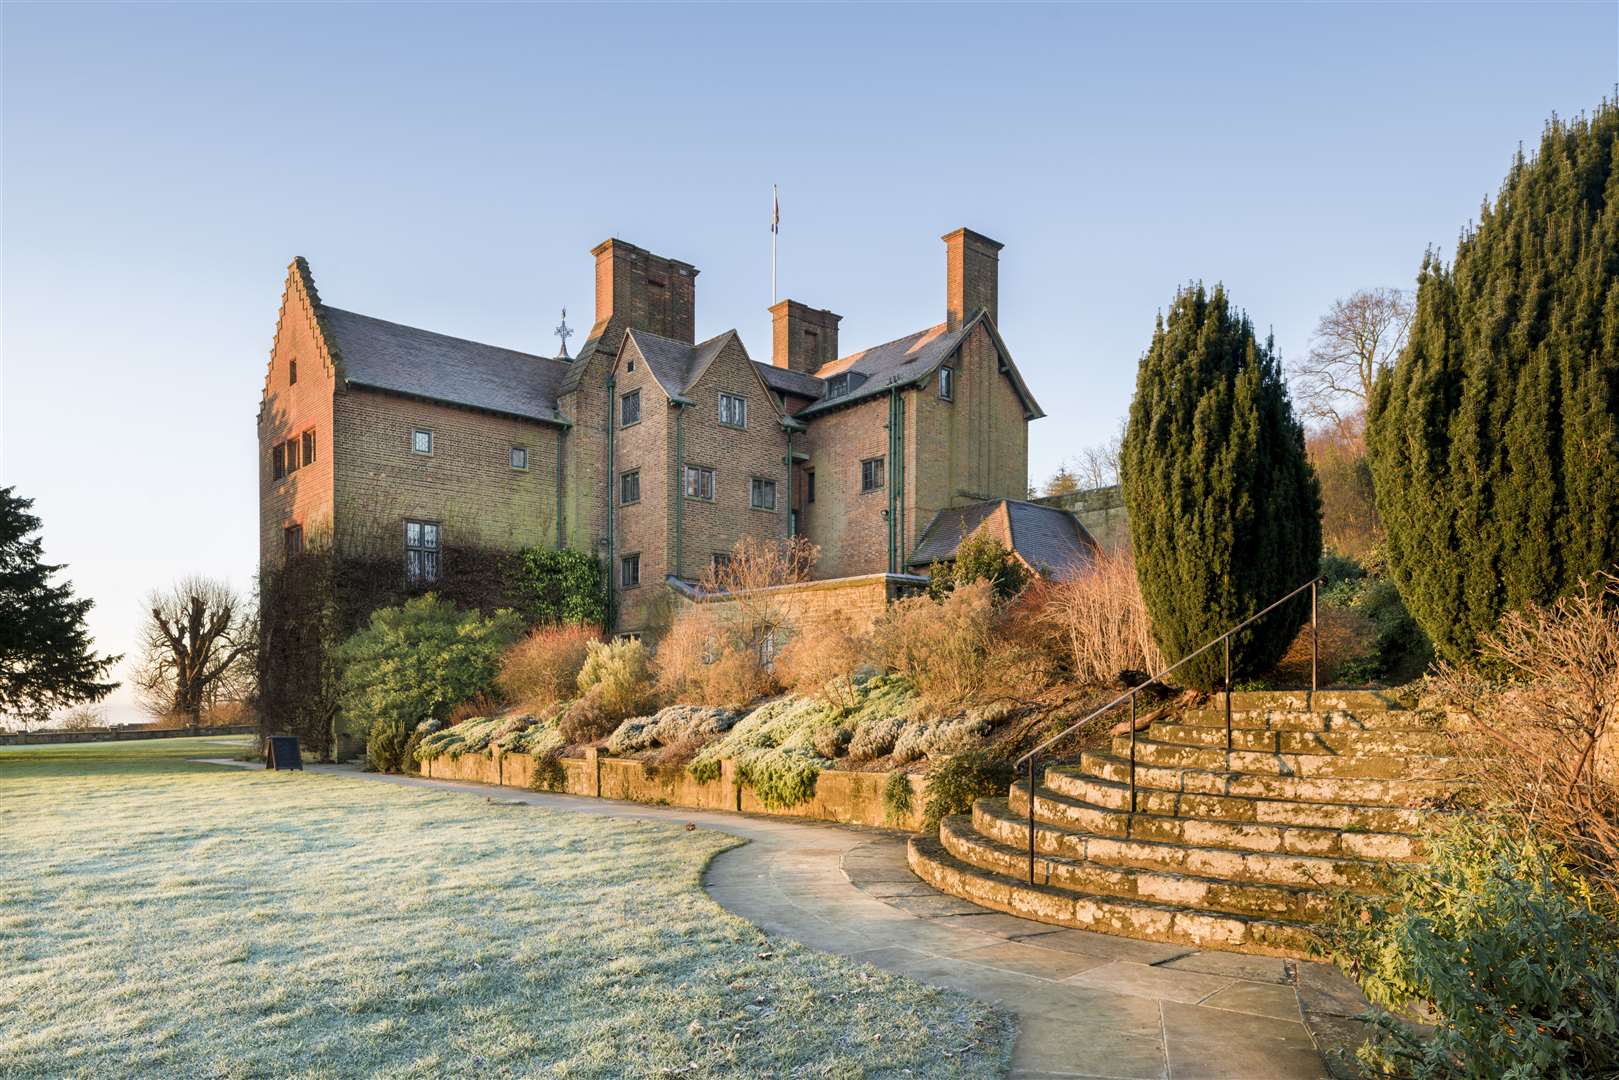 The gardens at Chartwell in January. Picture: National Trust Images/Andrew Butler